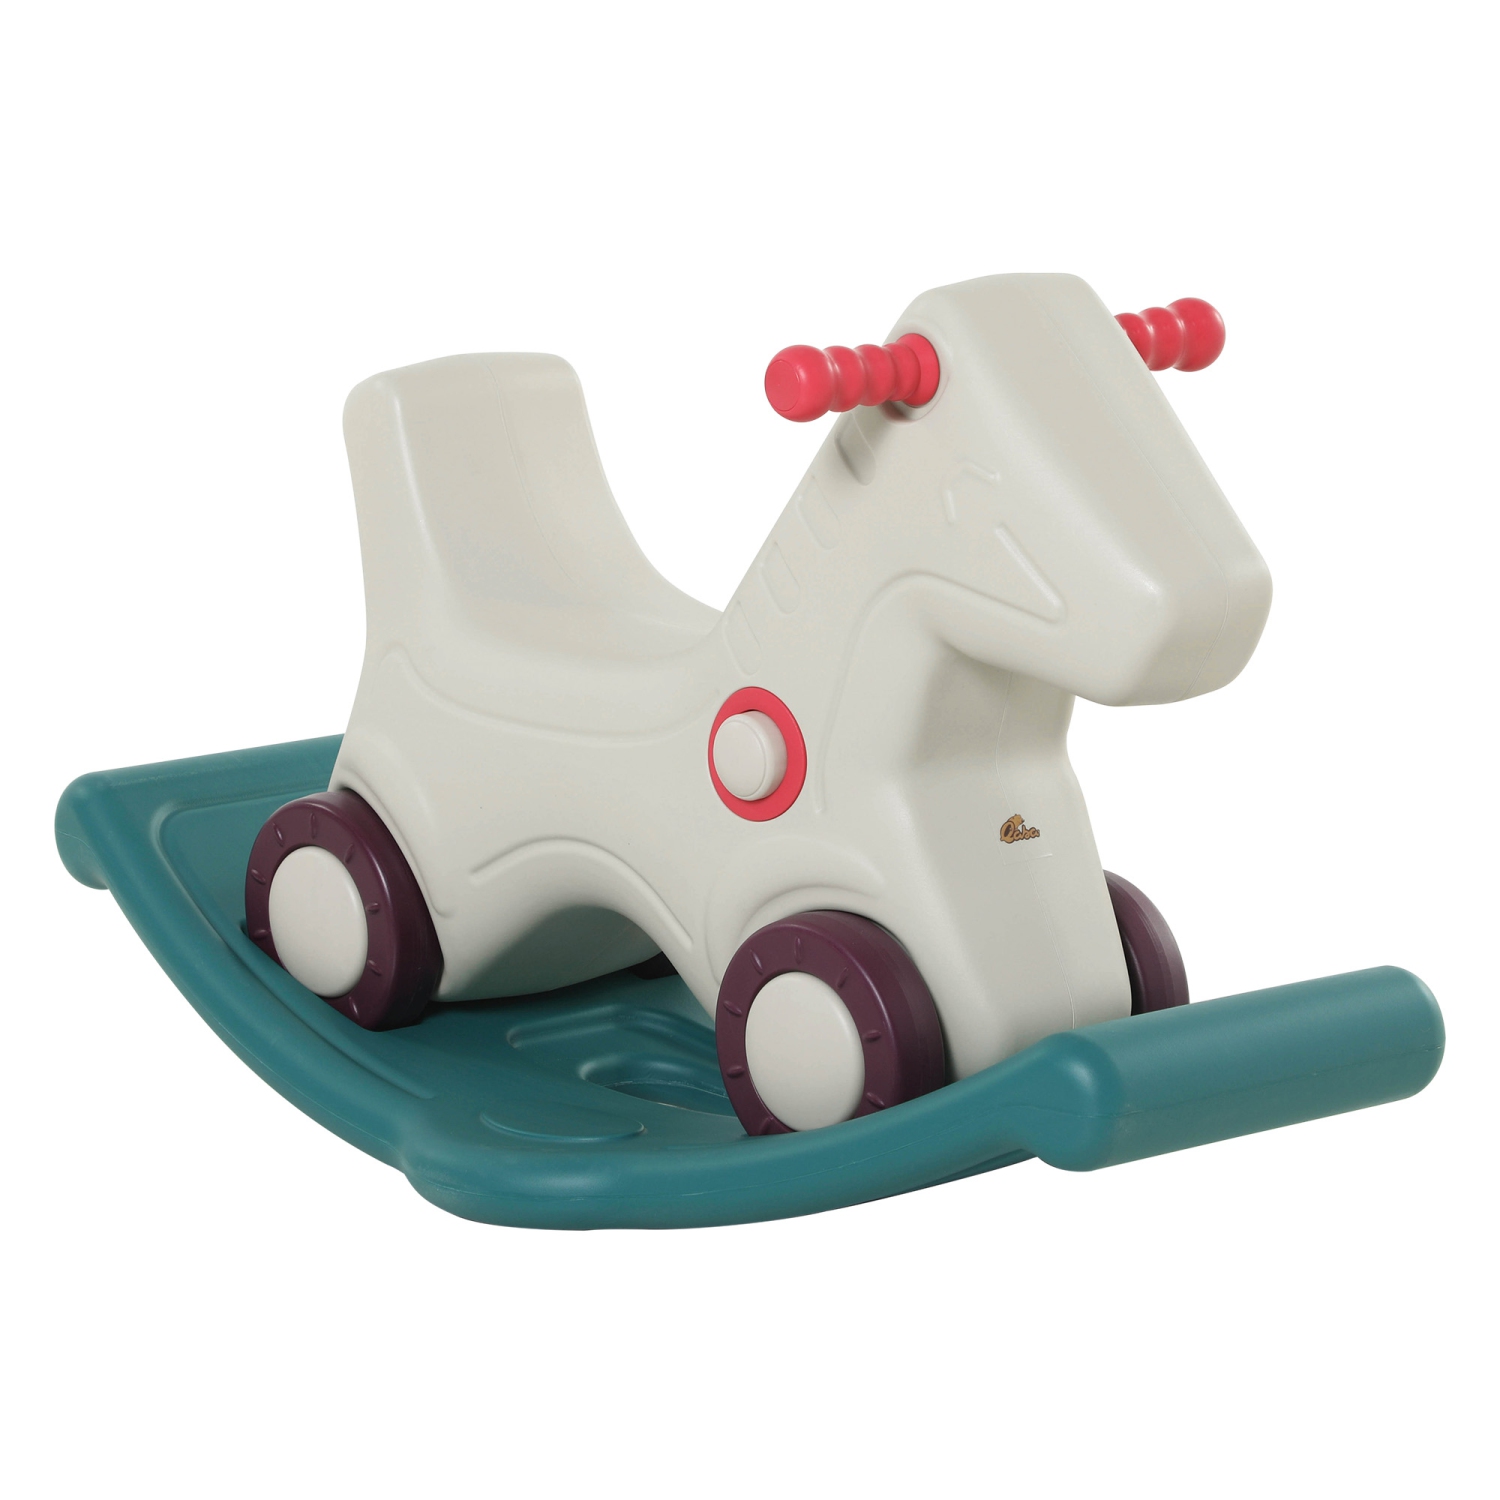 Qaba Rocking Horse 2 in 1 Ride on Toys and Sliding Car for Kids Baby Rocker Roller Toddler Playset Indoor Outdoor 1-4 Years Old